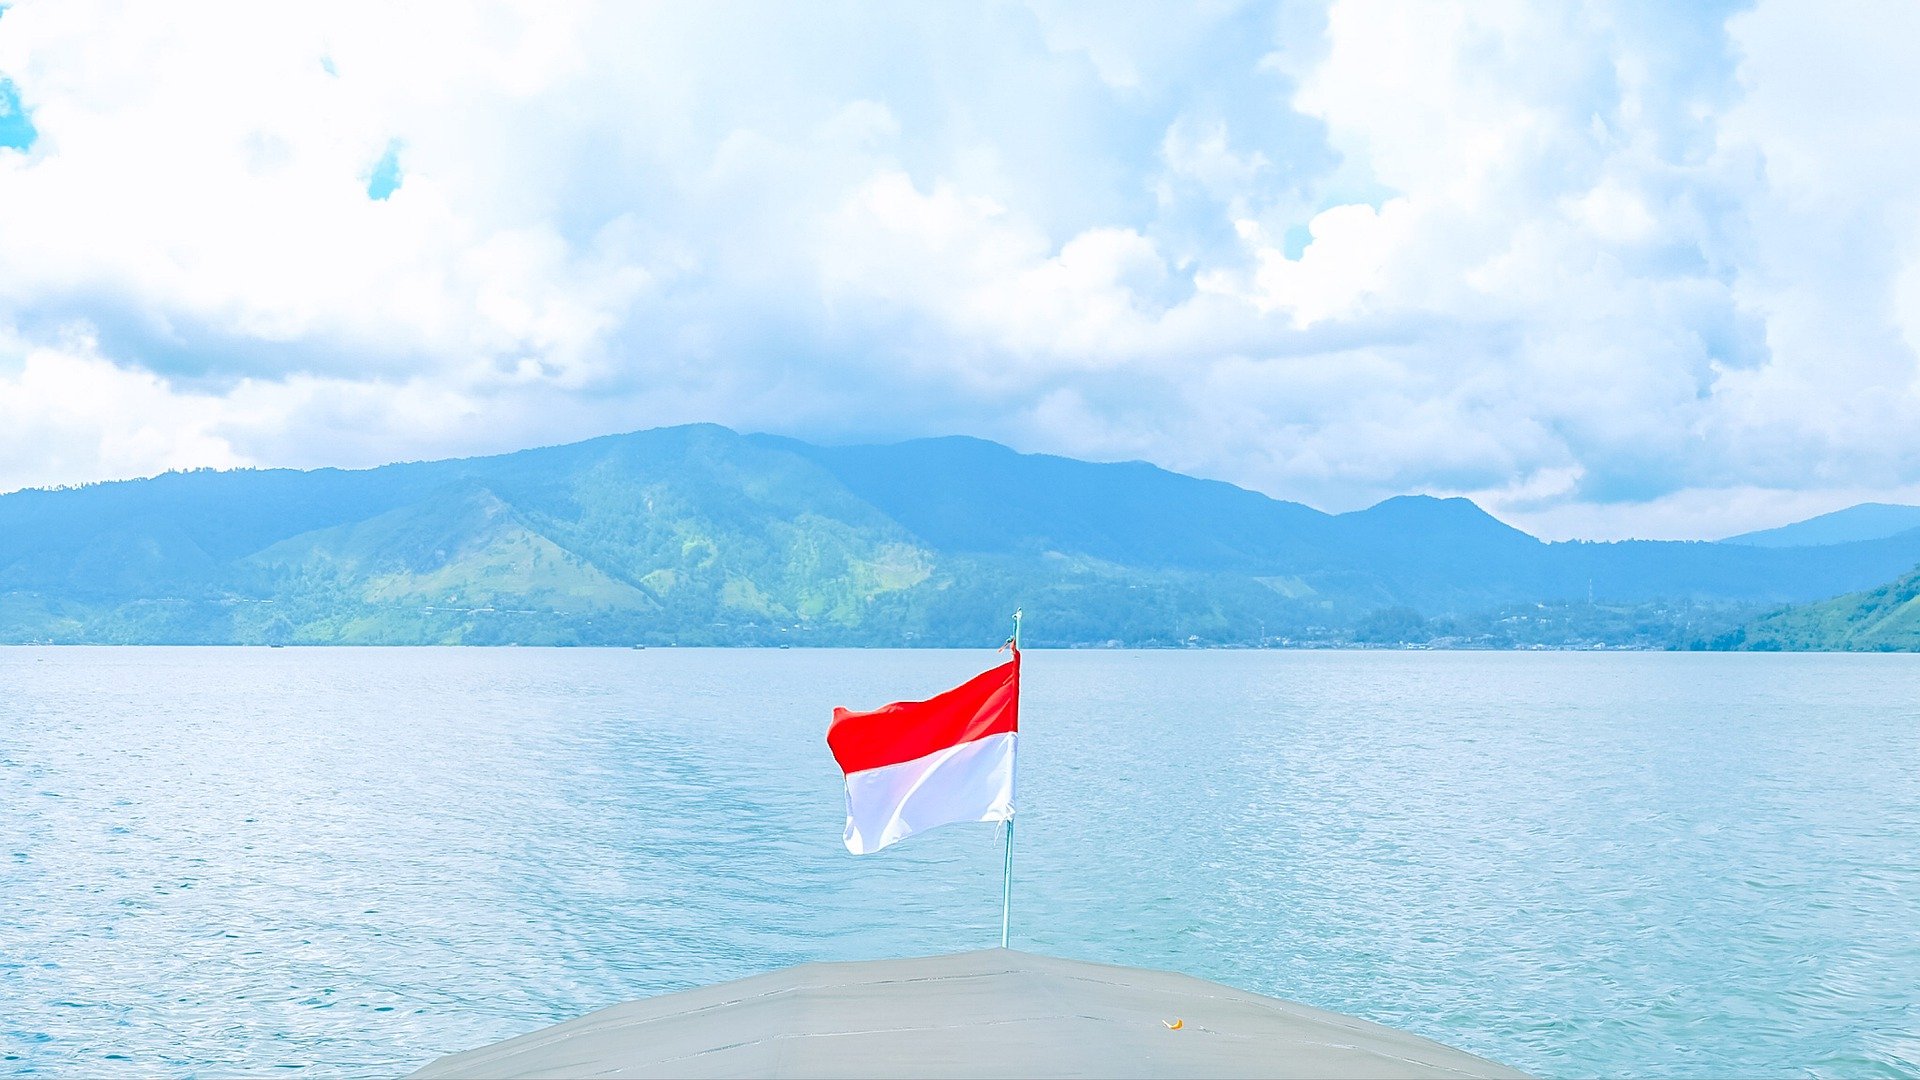 If you turned the Indonesian flag upside down which European country's flag would you get? 